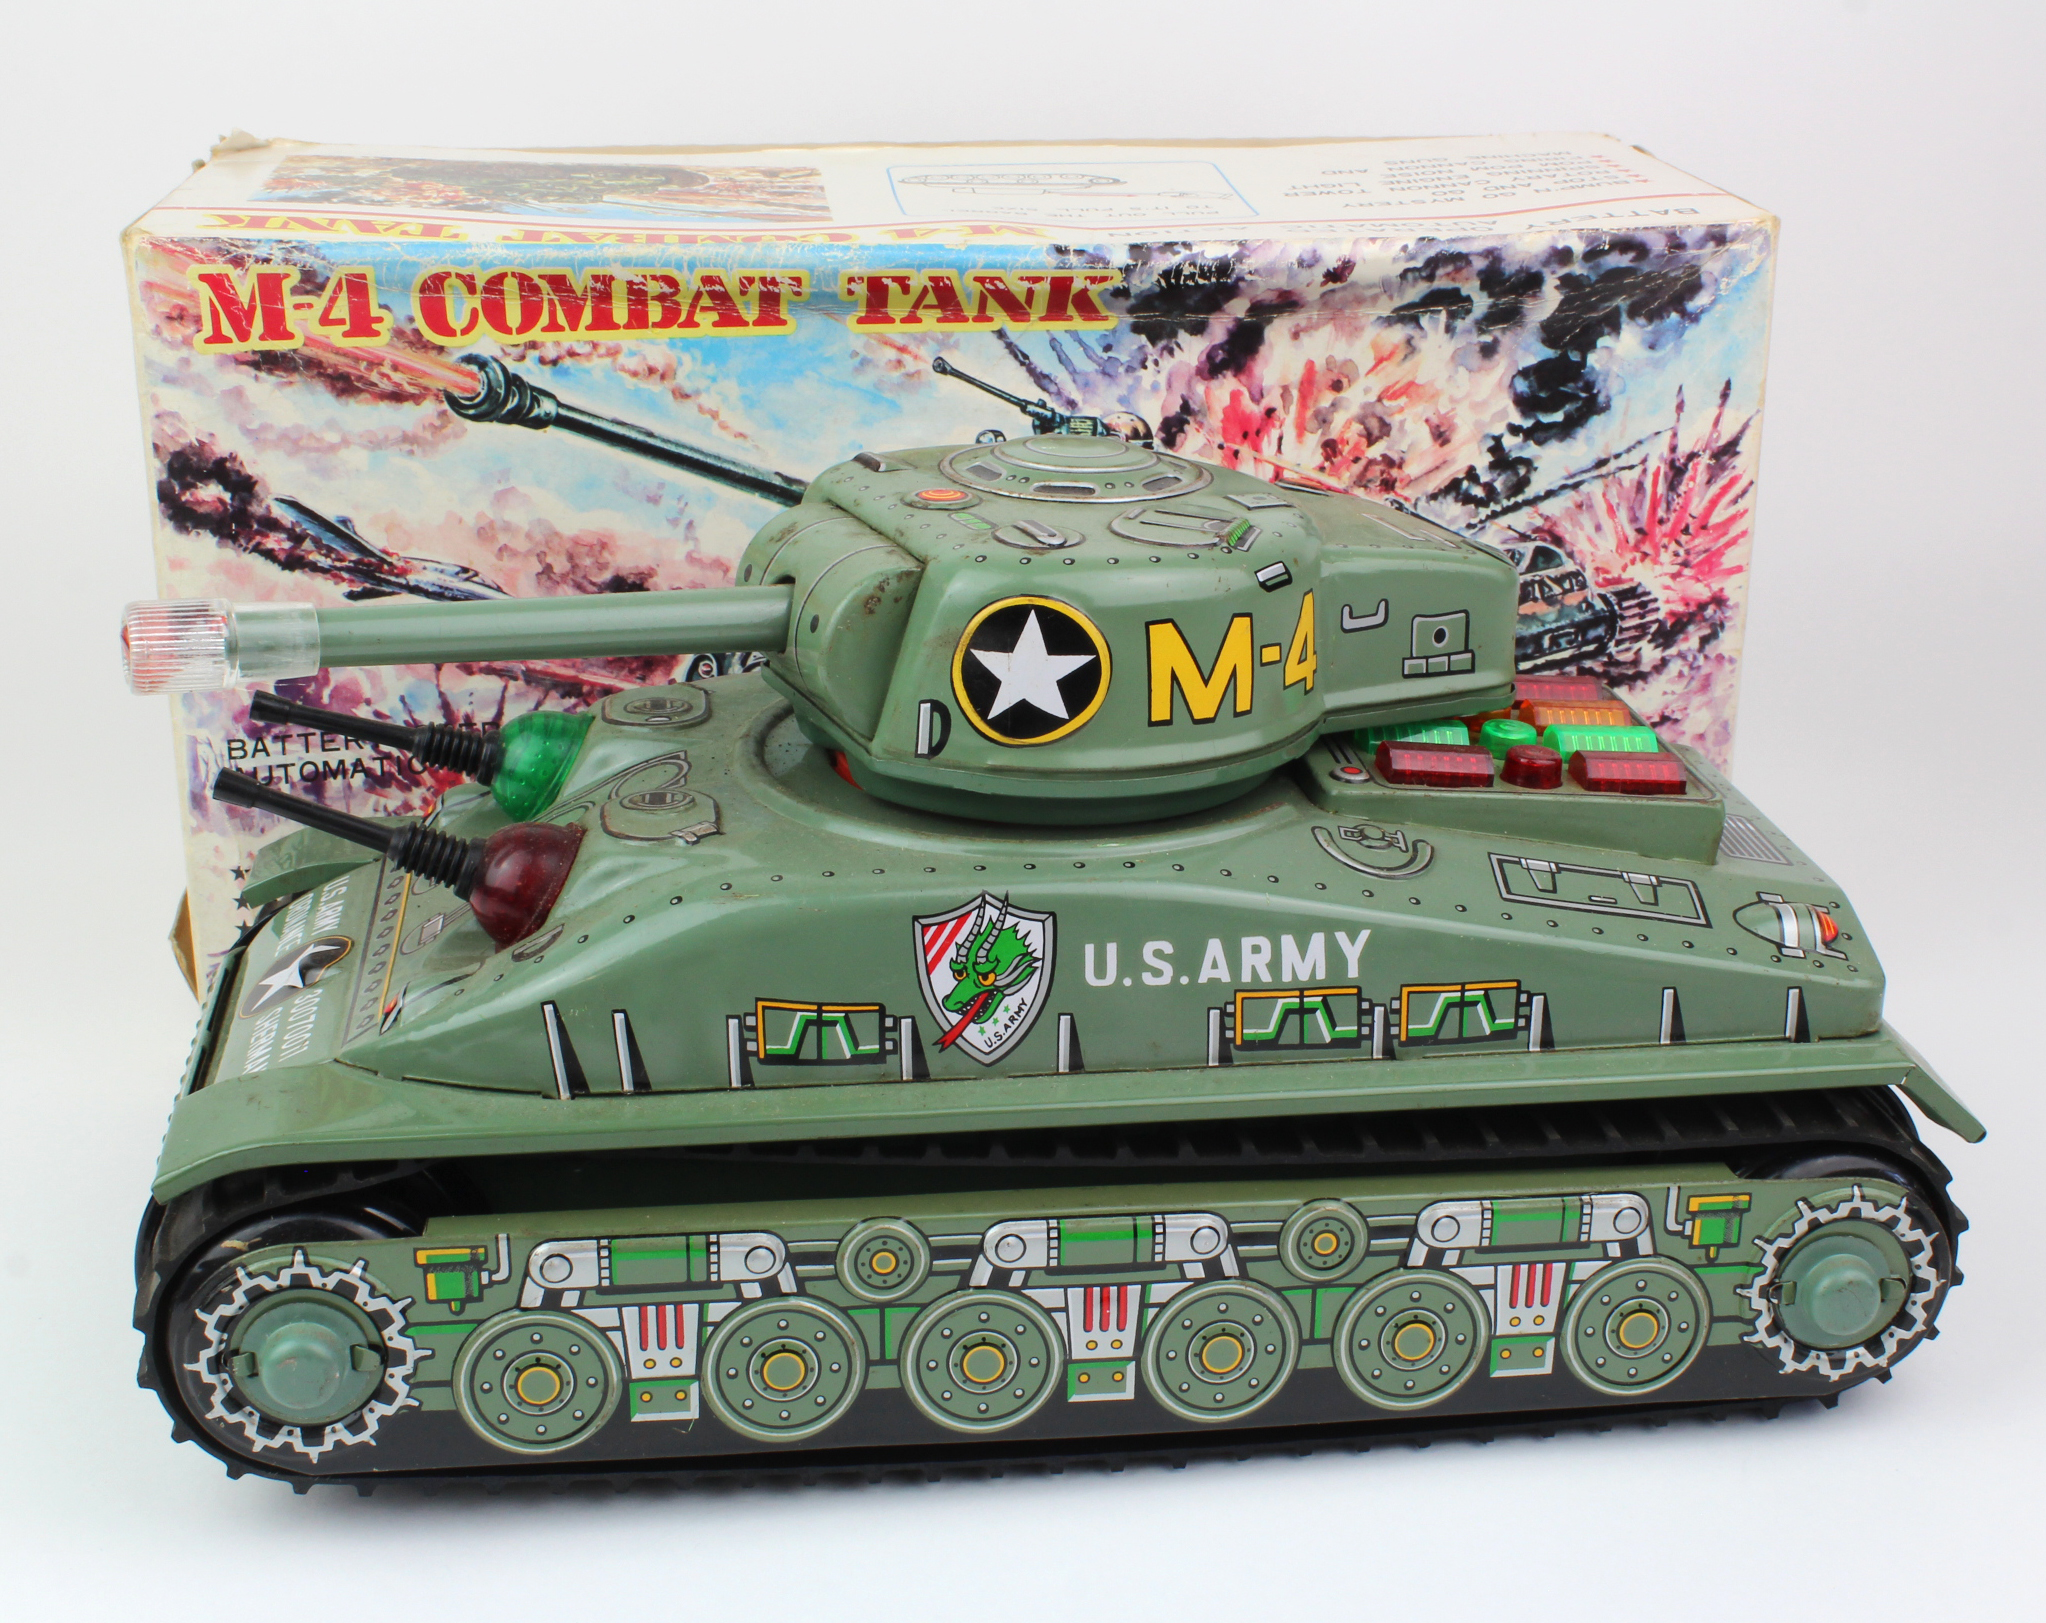 Japanese tinplate M4 combat Tank, made by Taiyo, contained in original box